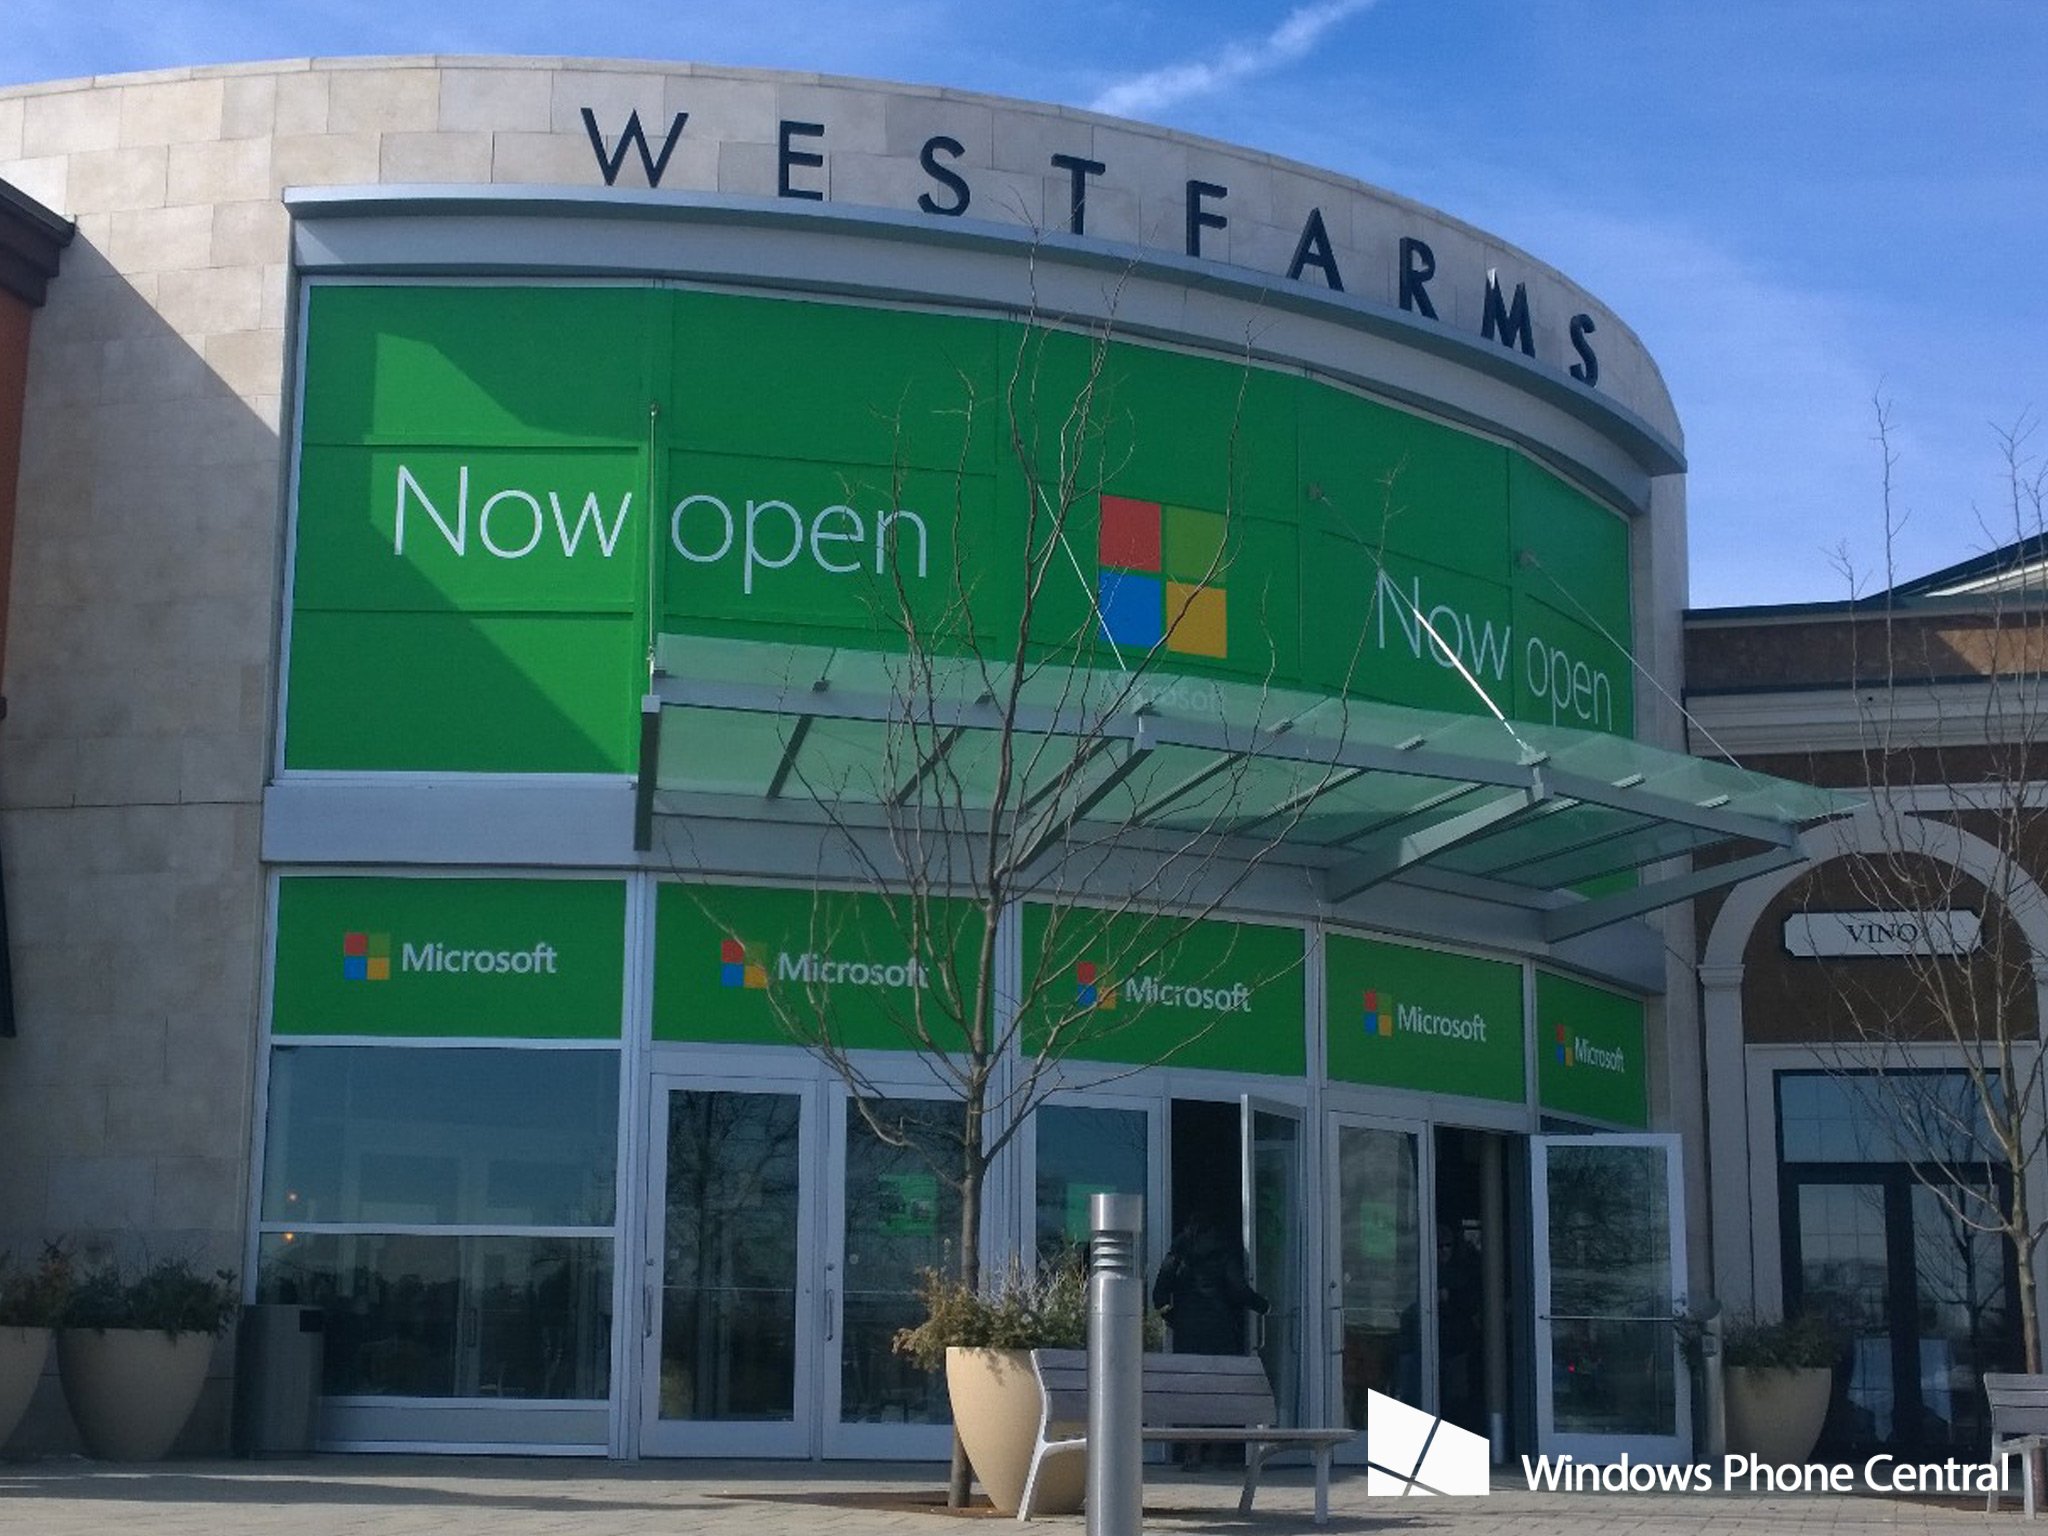 New Shops Opening At Westfarms This Summer, Next Year